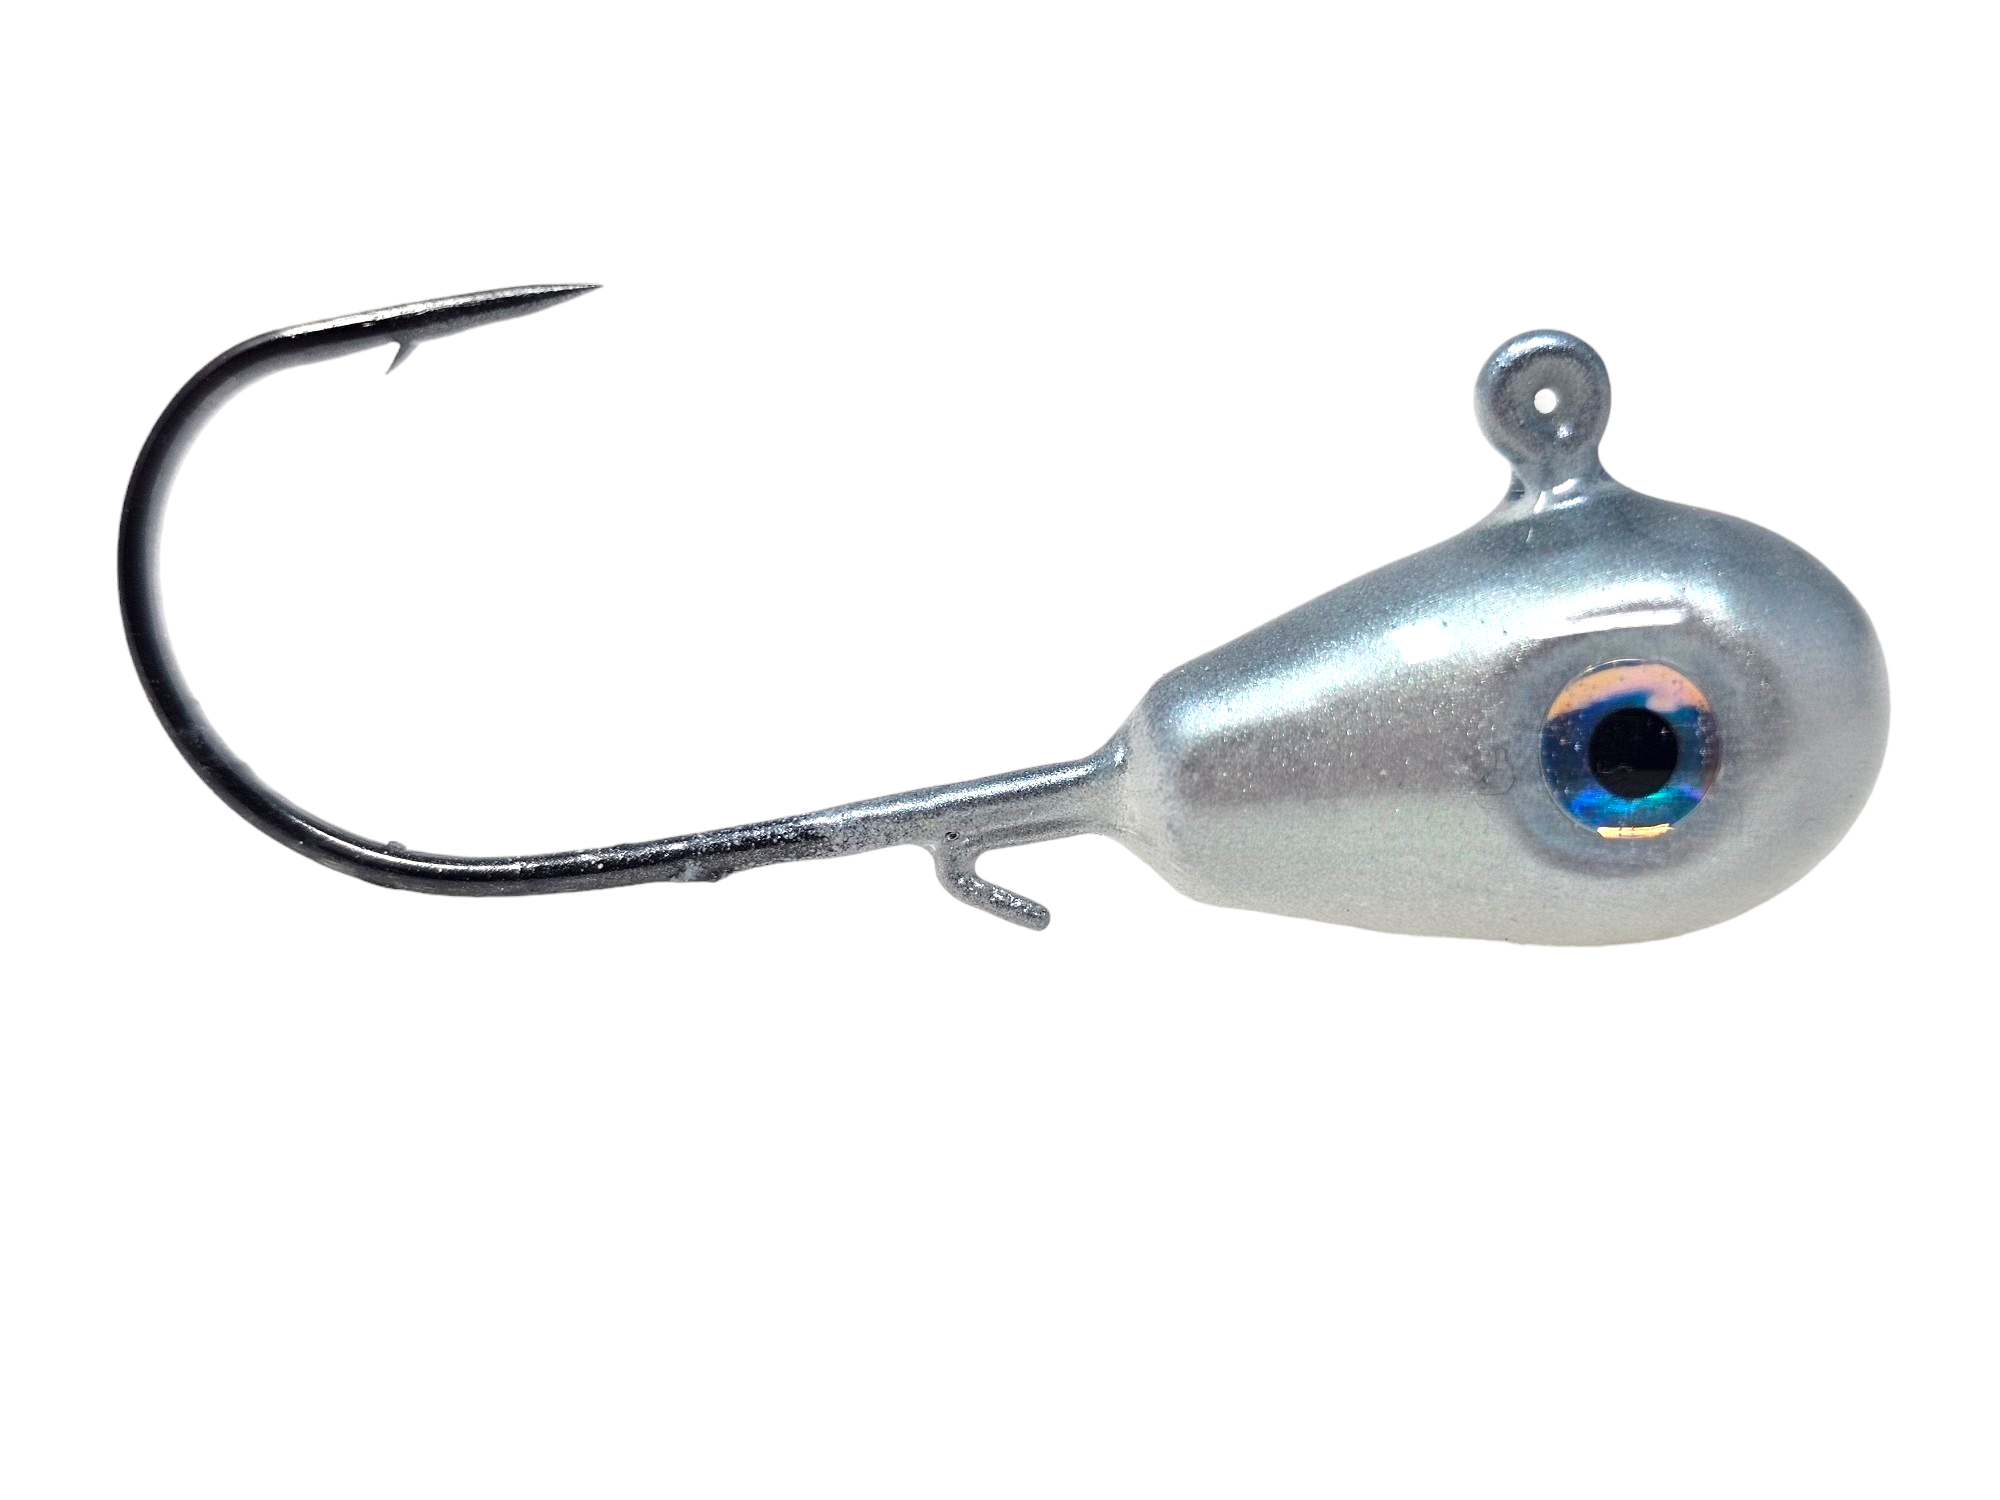 Lure kit contains eye, fin and lure. Paint in your favorite